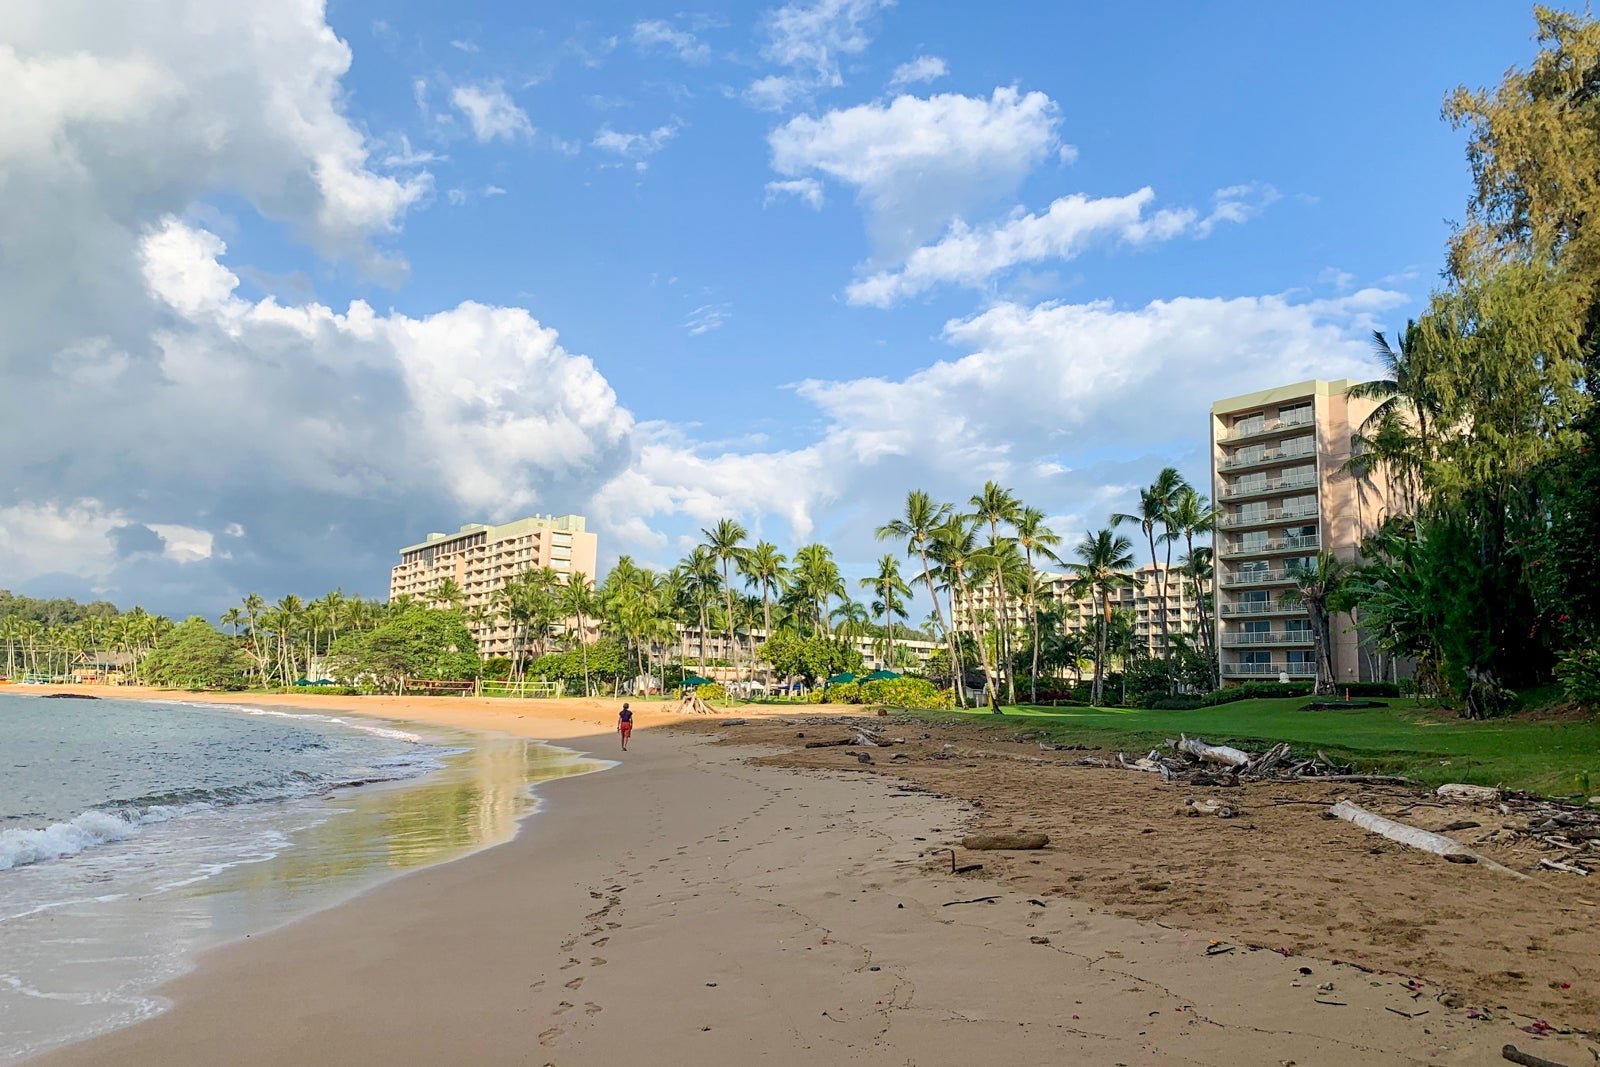 Fabulous property but dated rooms; The Kauai Marriott that will soon be a Sonesta